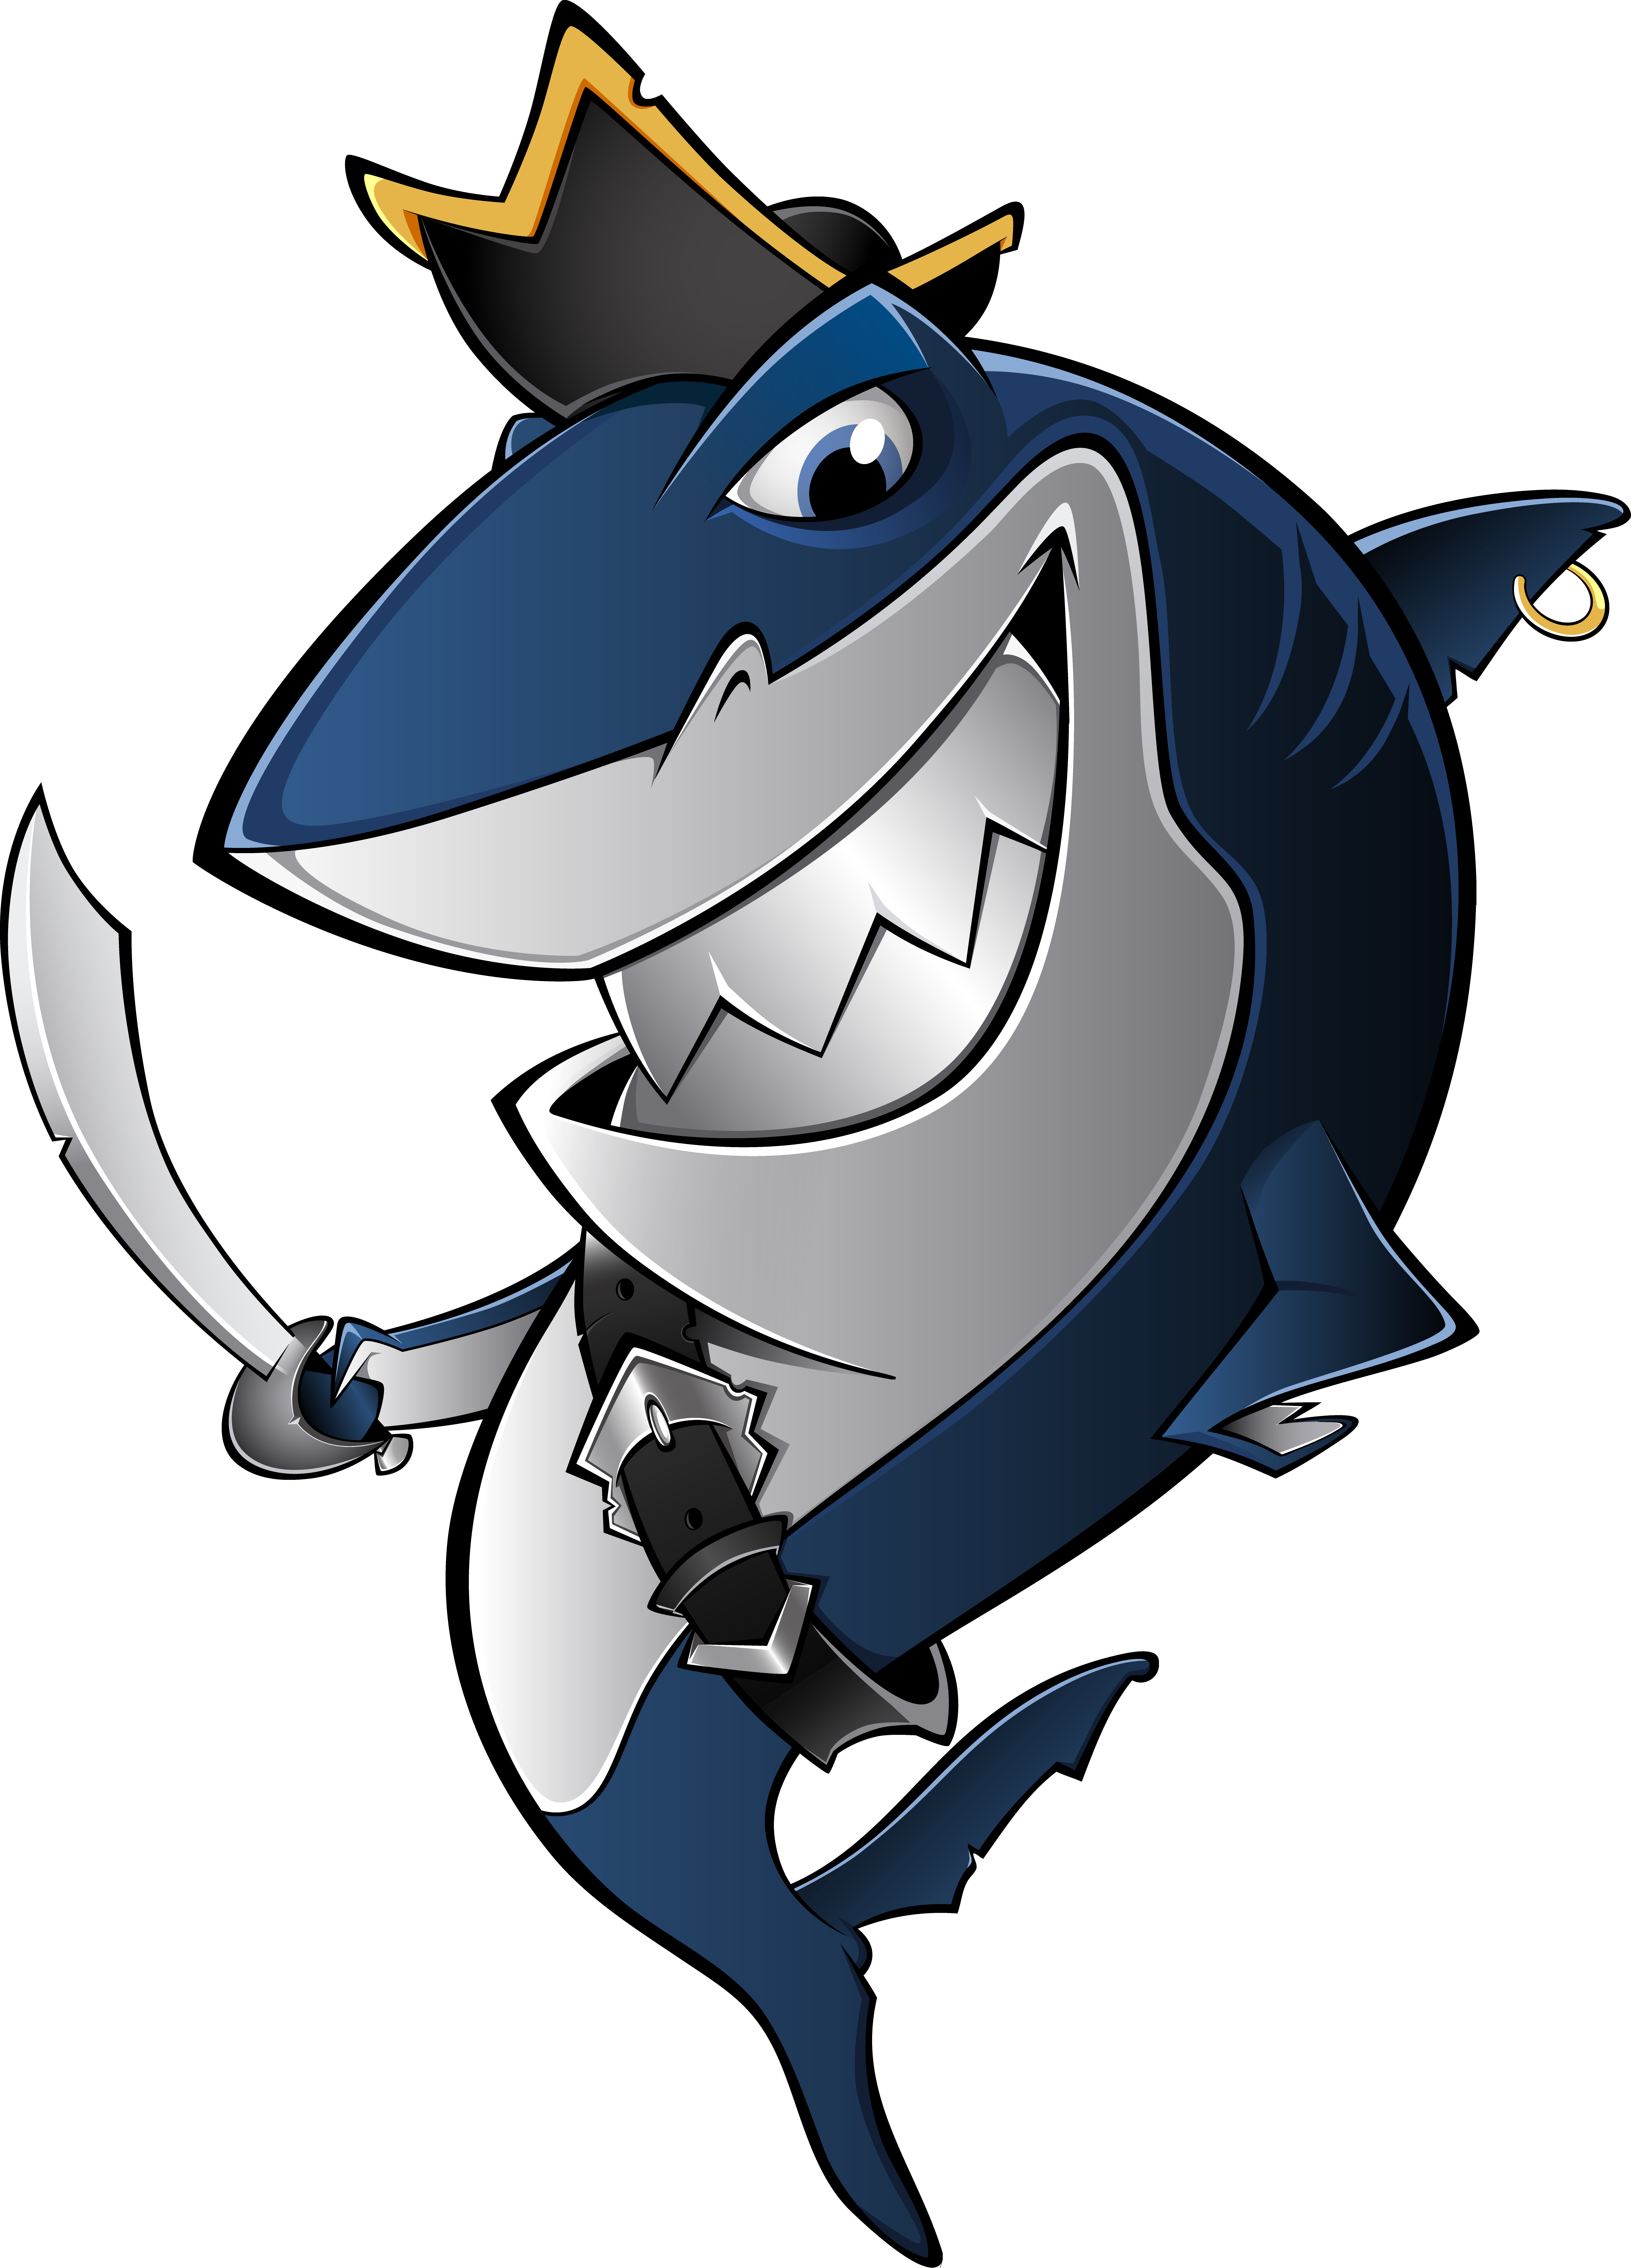 Shark piracy royalty free. Clipart cup navy blue